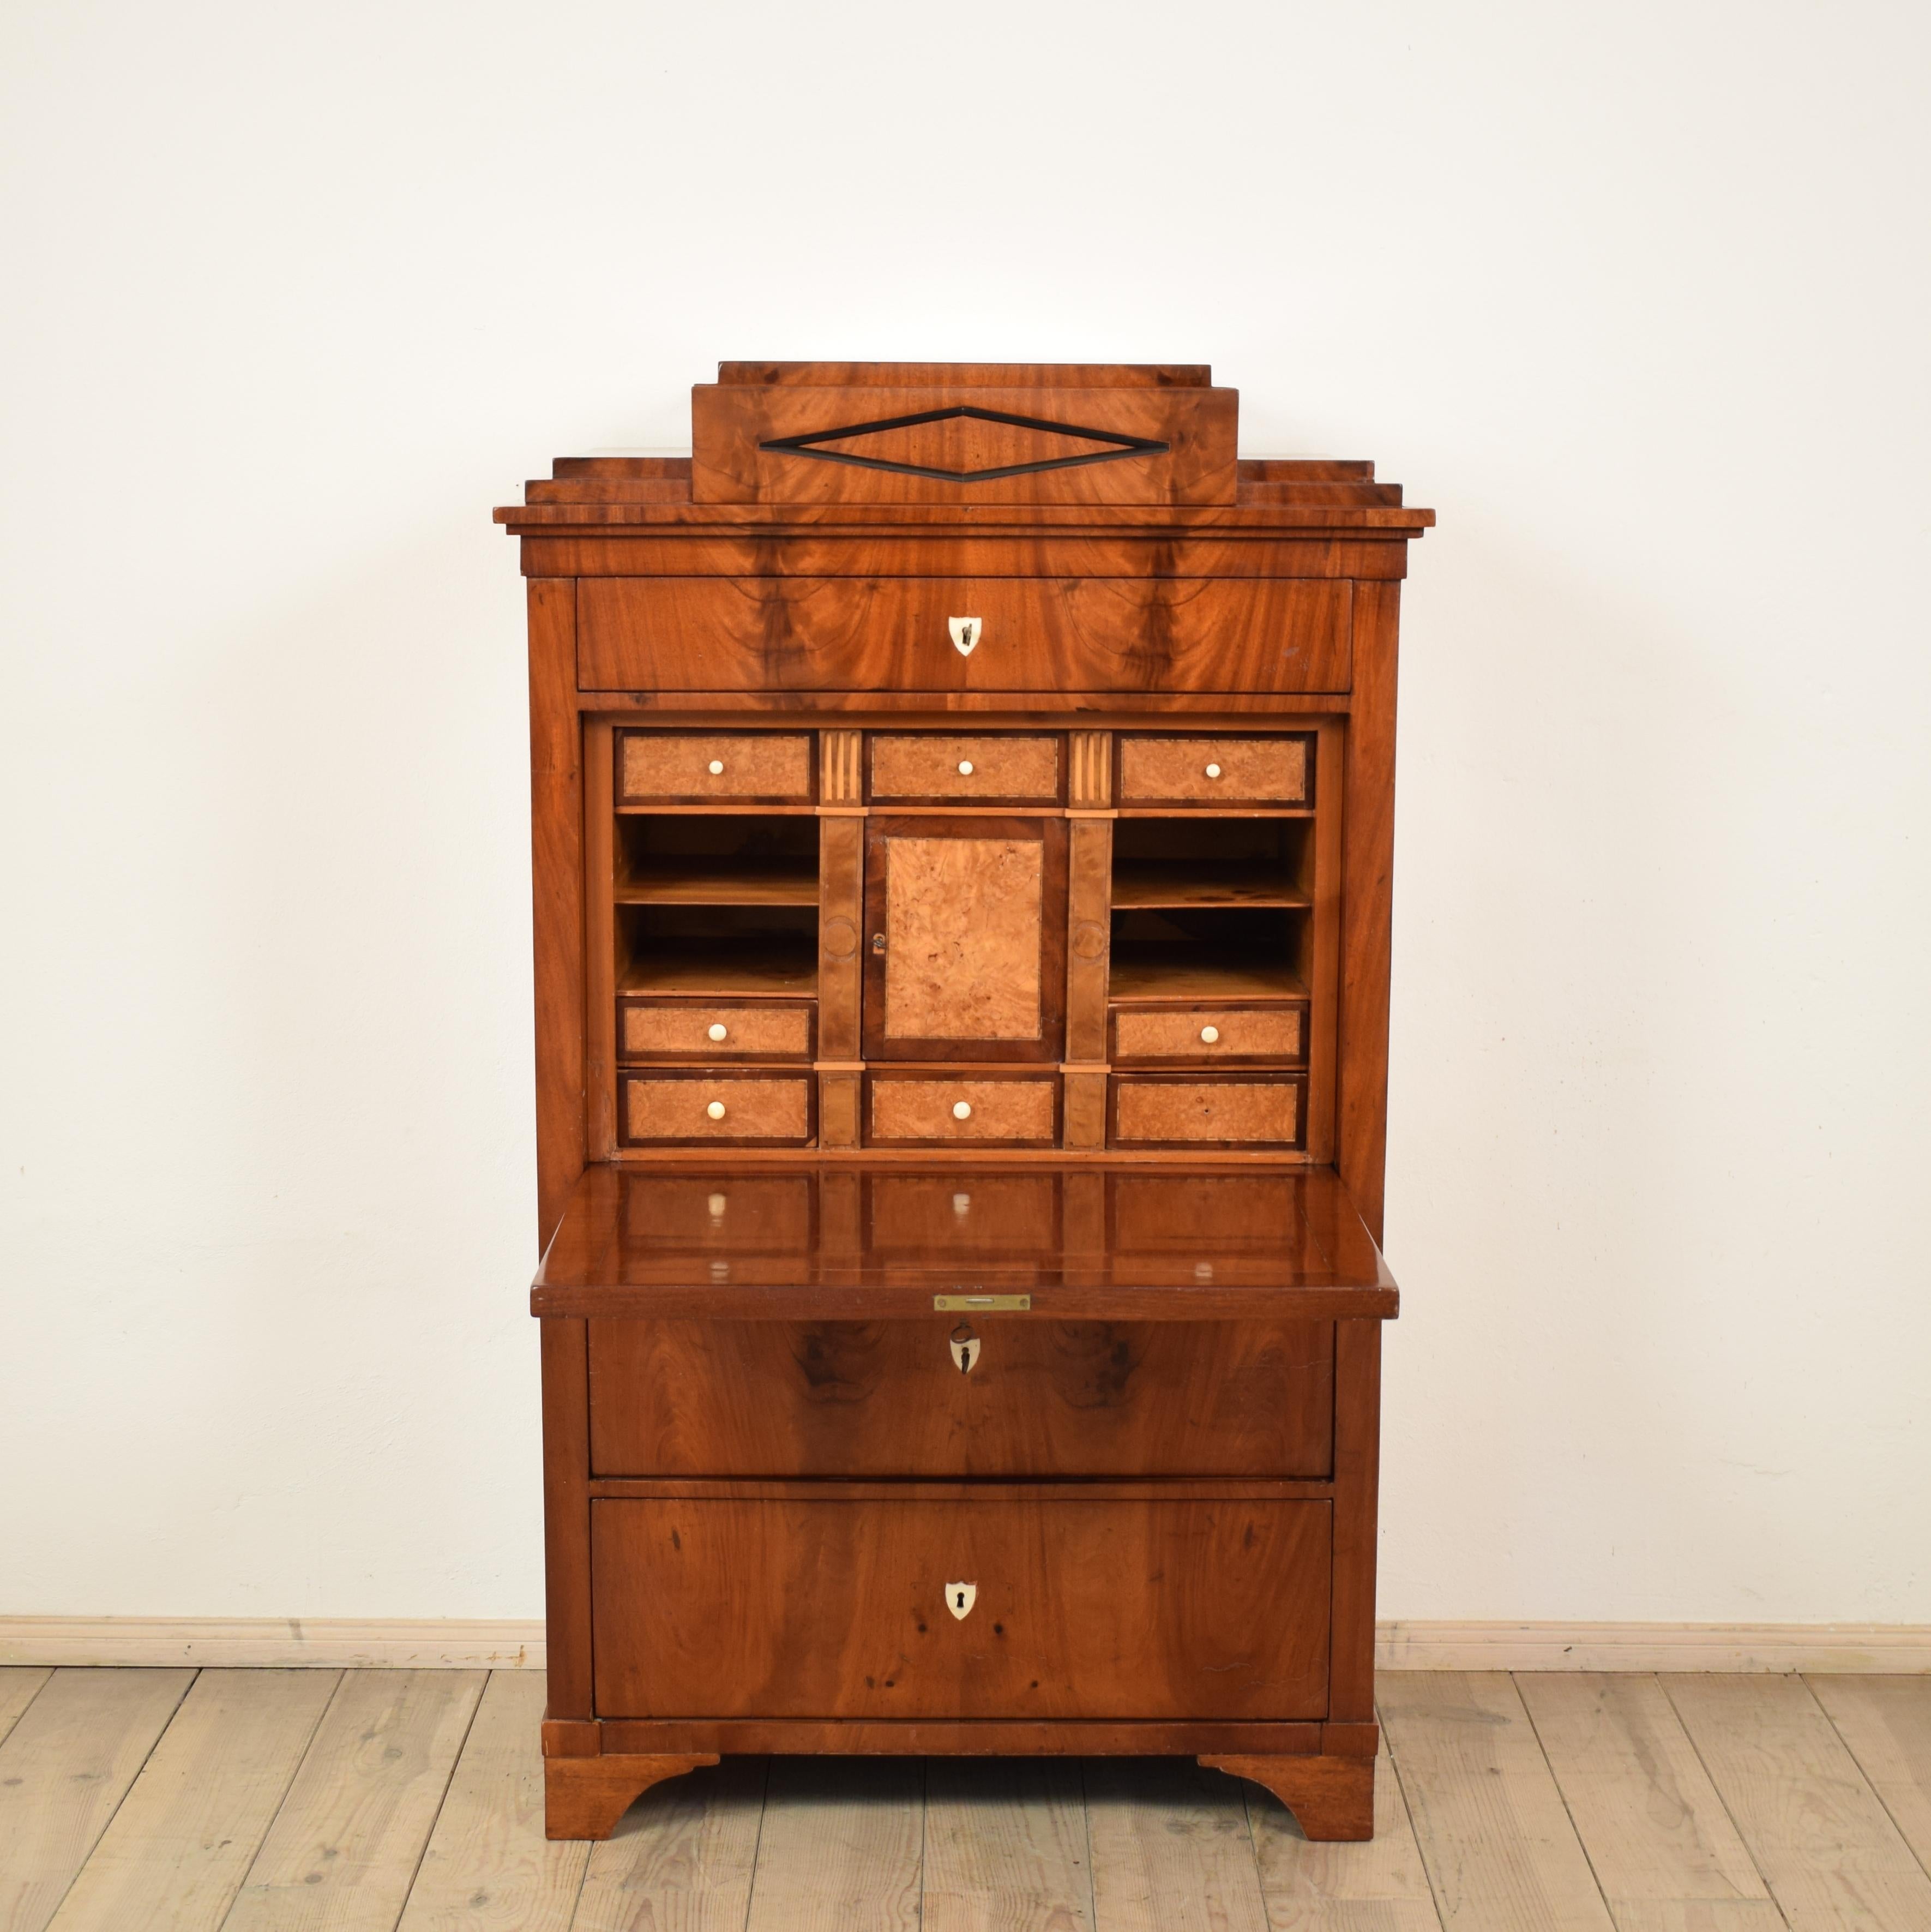 This Empire secretary was made in Germany, circa 1810. It is mahogany veneer on oak.
The inside its veneered in birch.
The architectural design is typical for this period. A very fine furniture which fits into a modern or classical home.